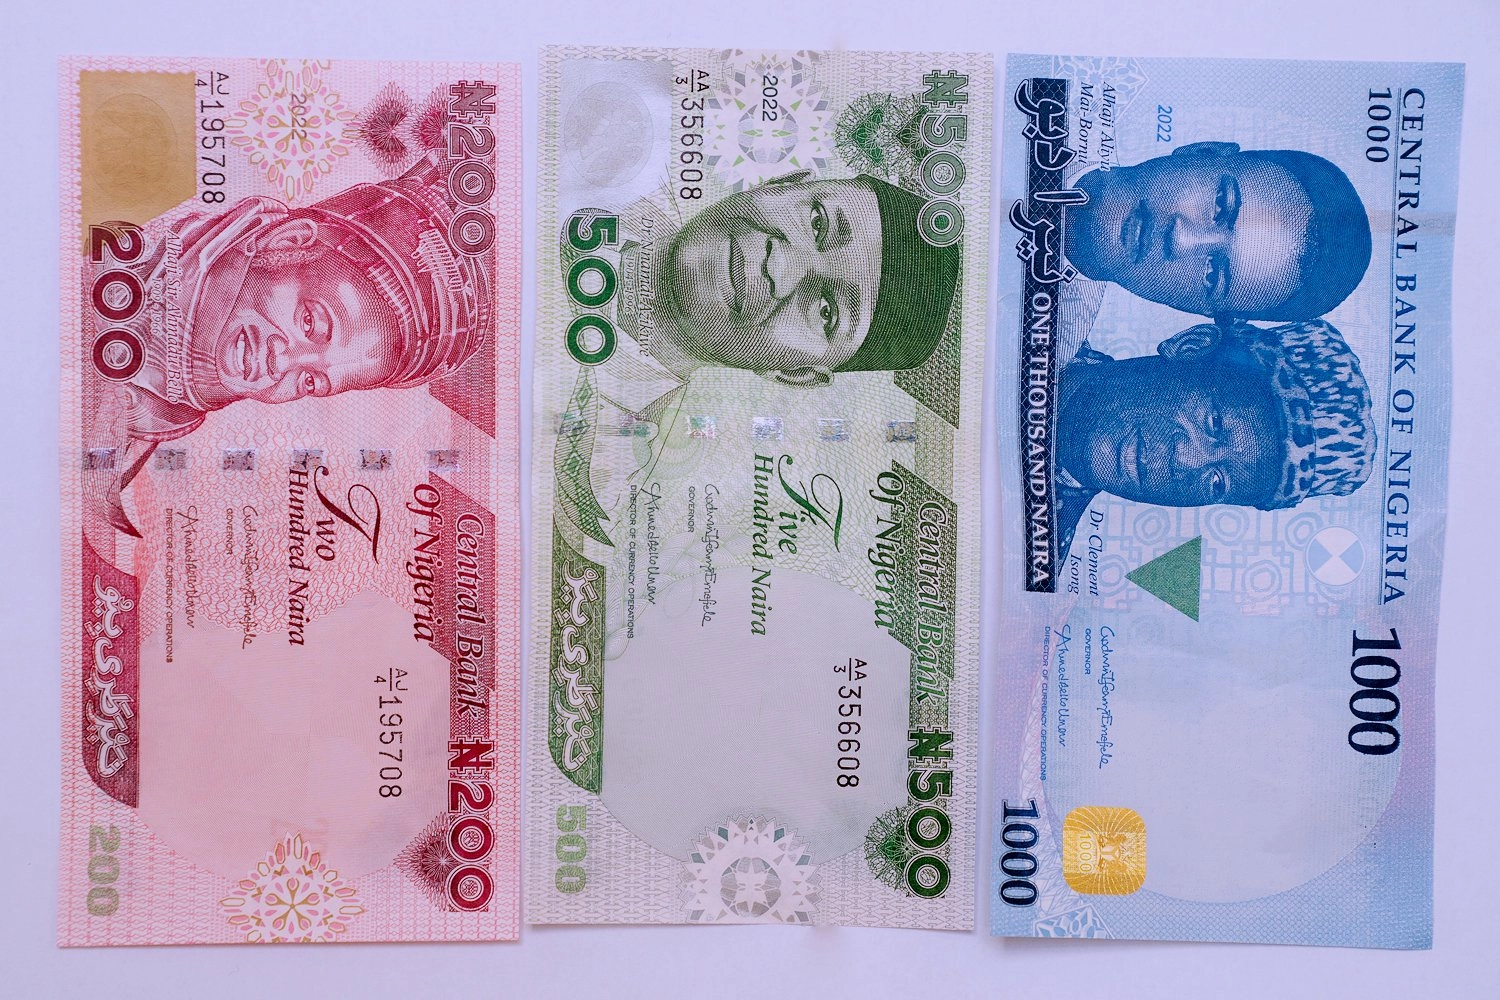 BREAKING: FG Unveils Redesigned Naira Notes To General Public (Photos)